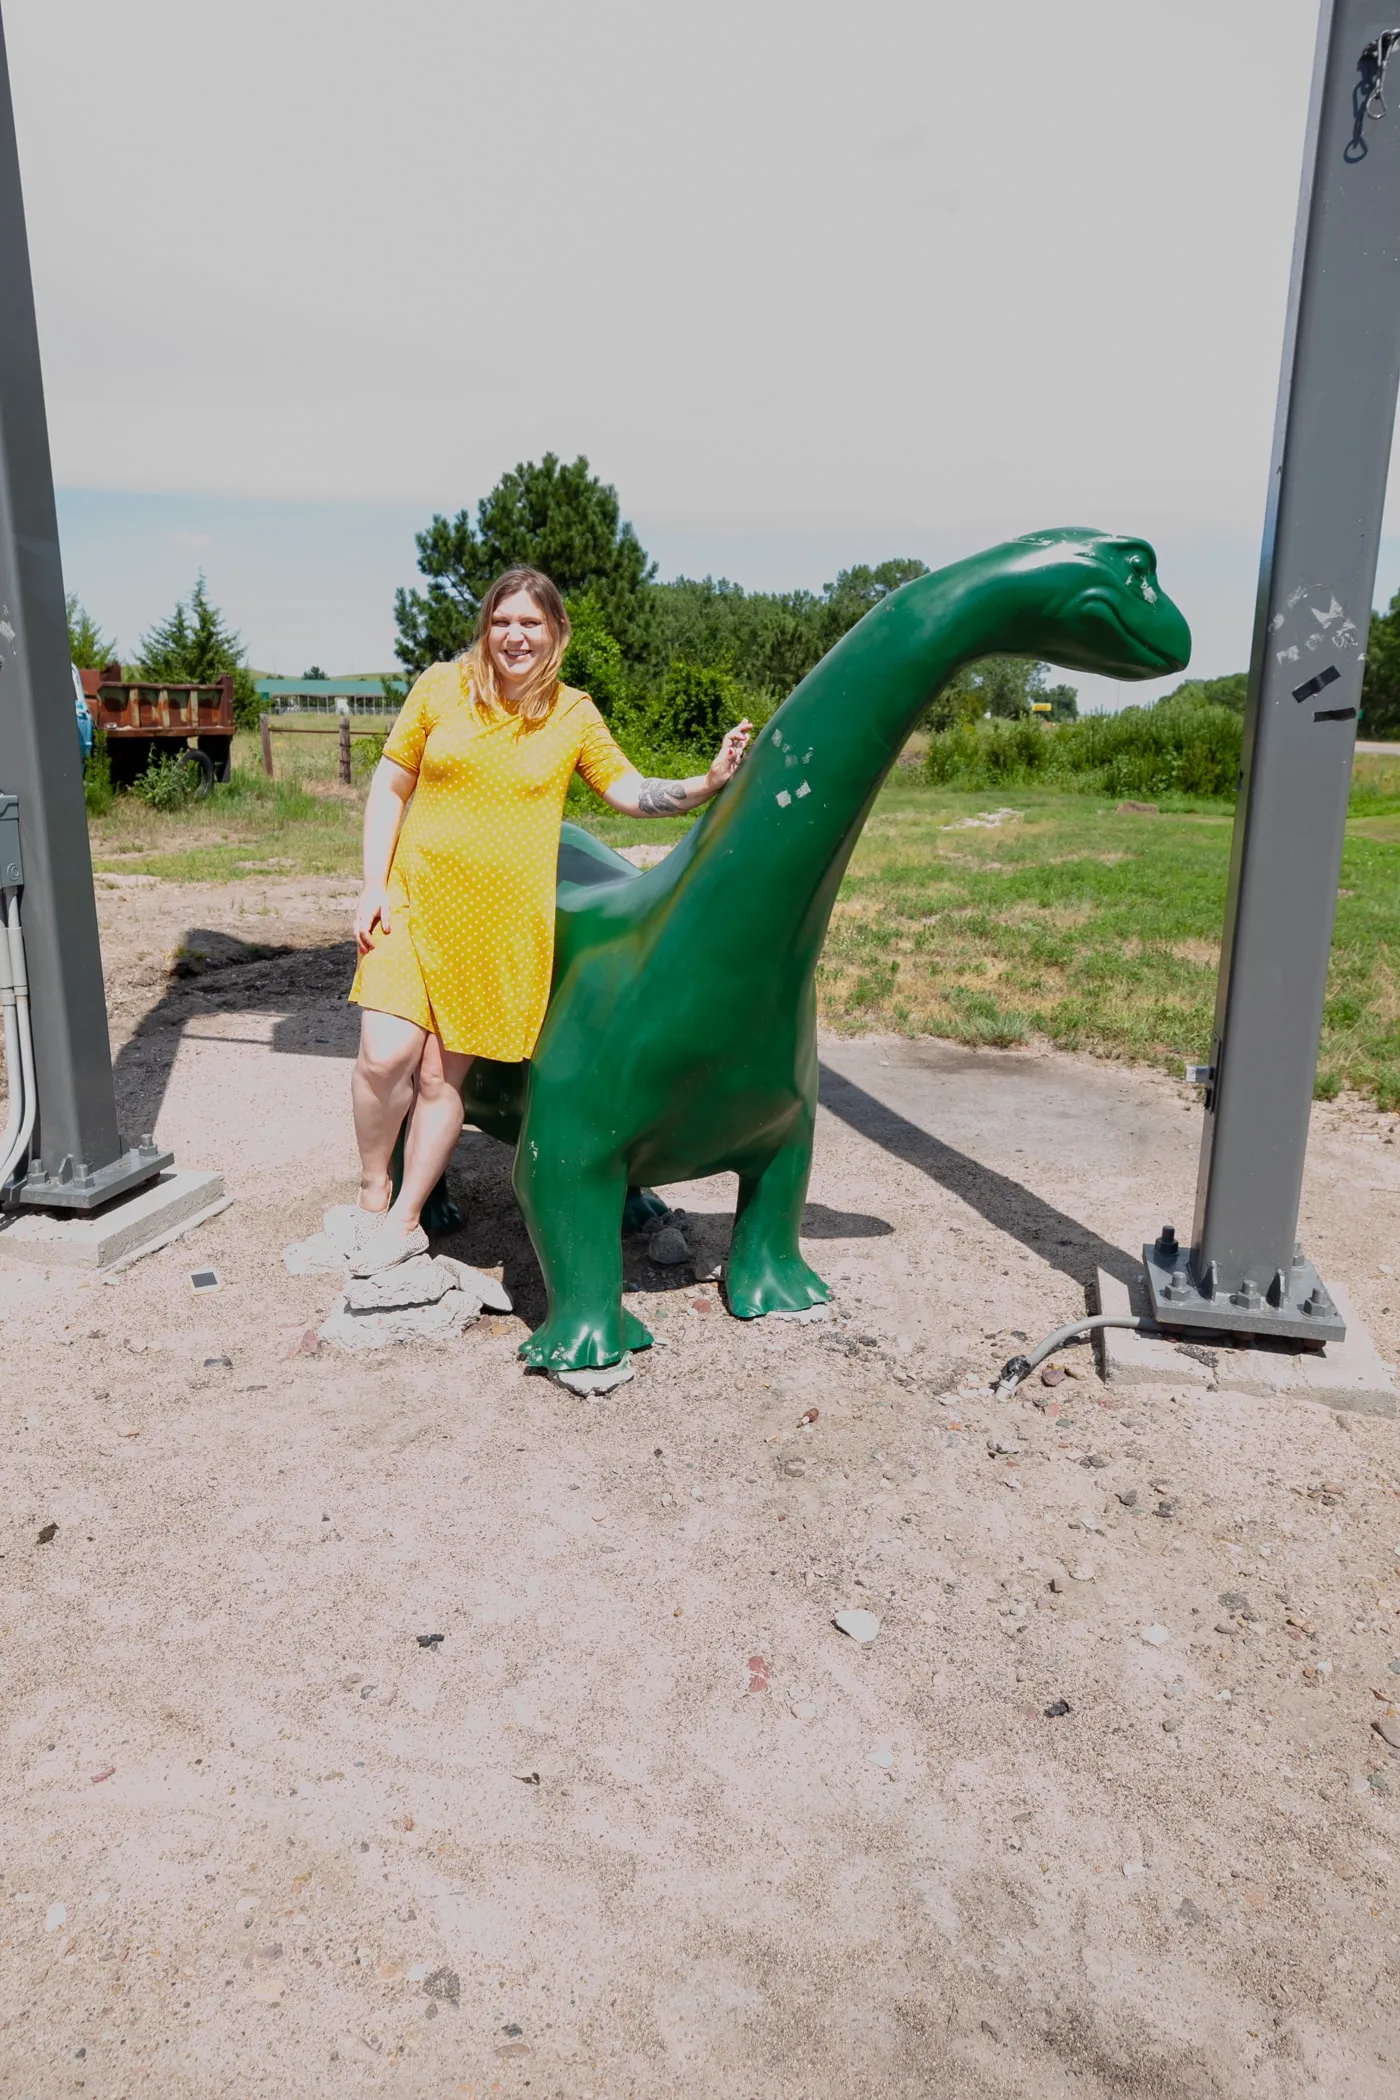 Sinclair Dinosaur in Thedford, Nebraska at a Sinclair Gas Station on the Sandhills Journey Scenic Byway | Nebraska Roadside Attractions